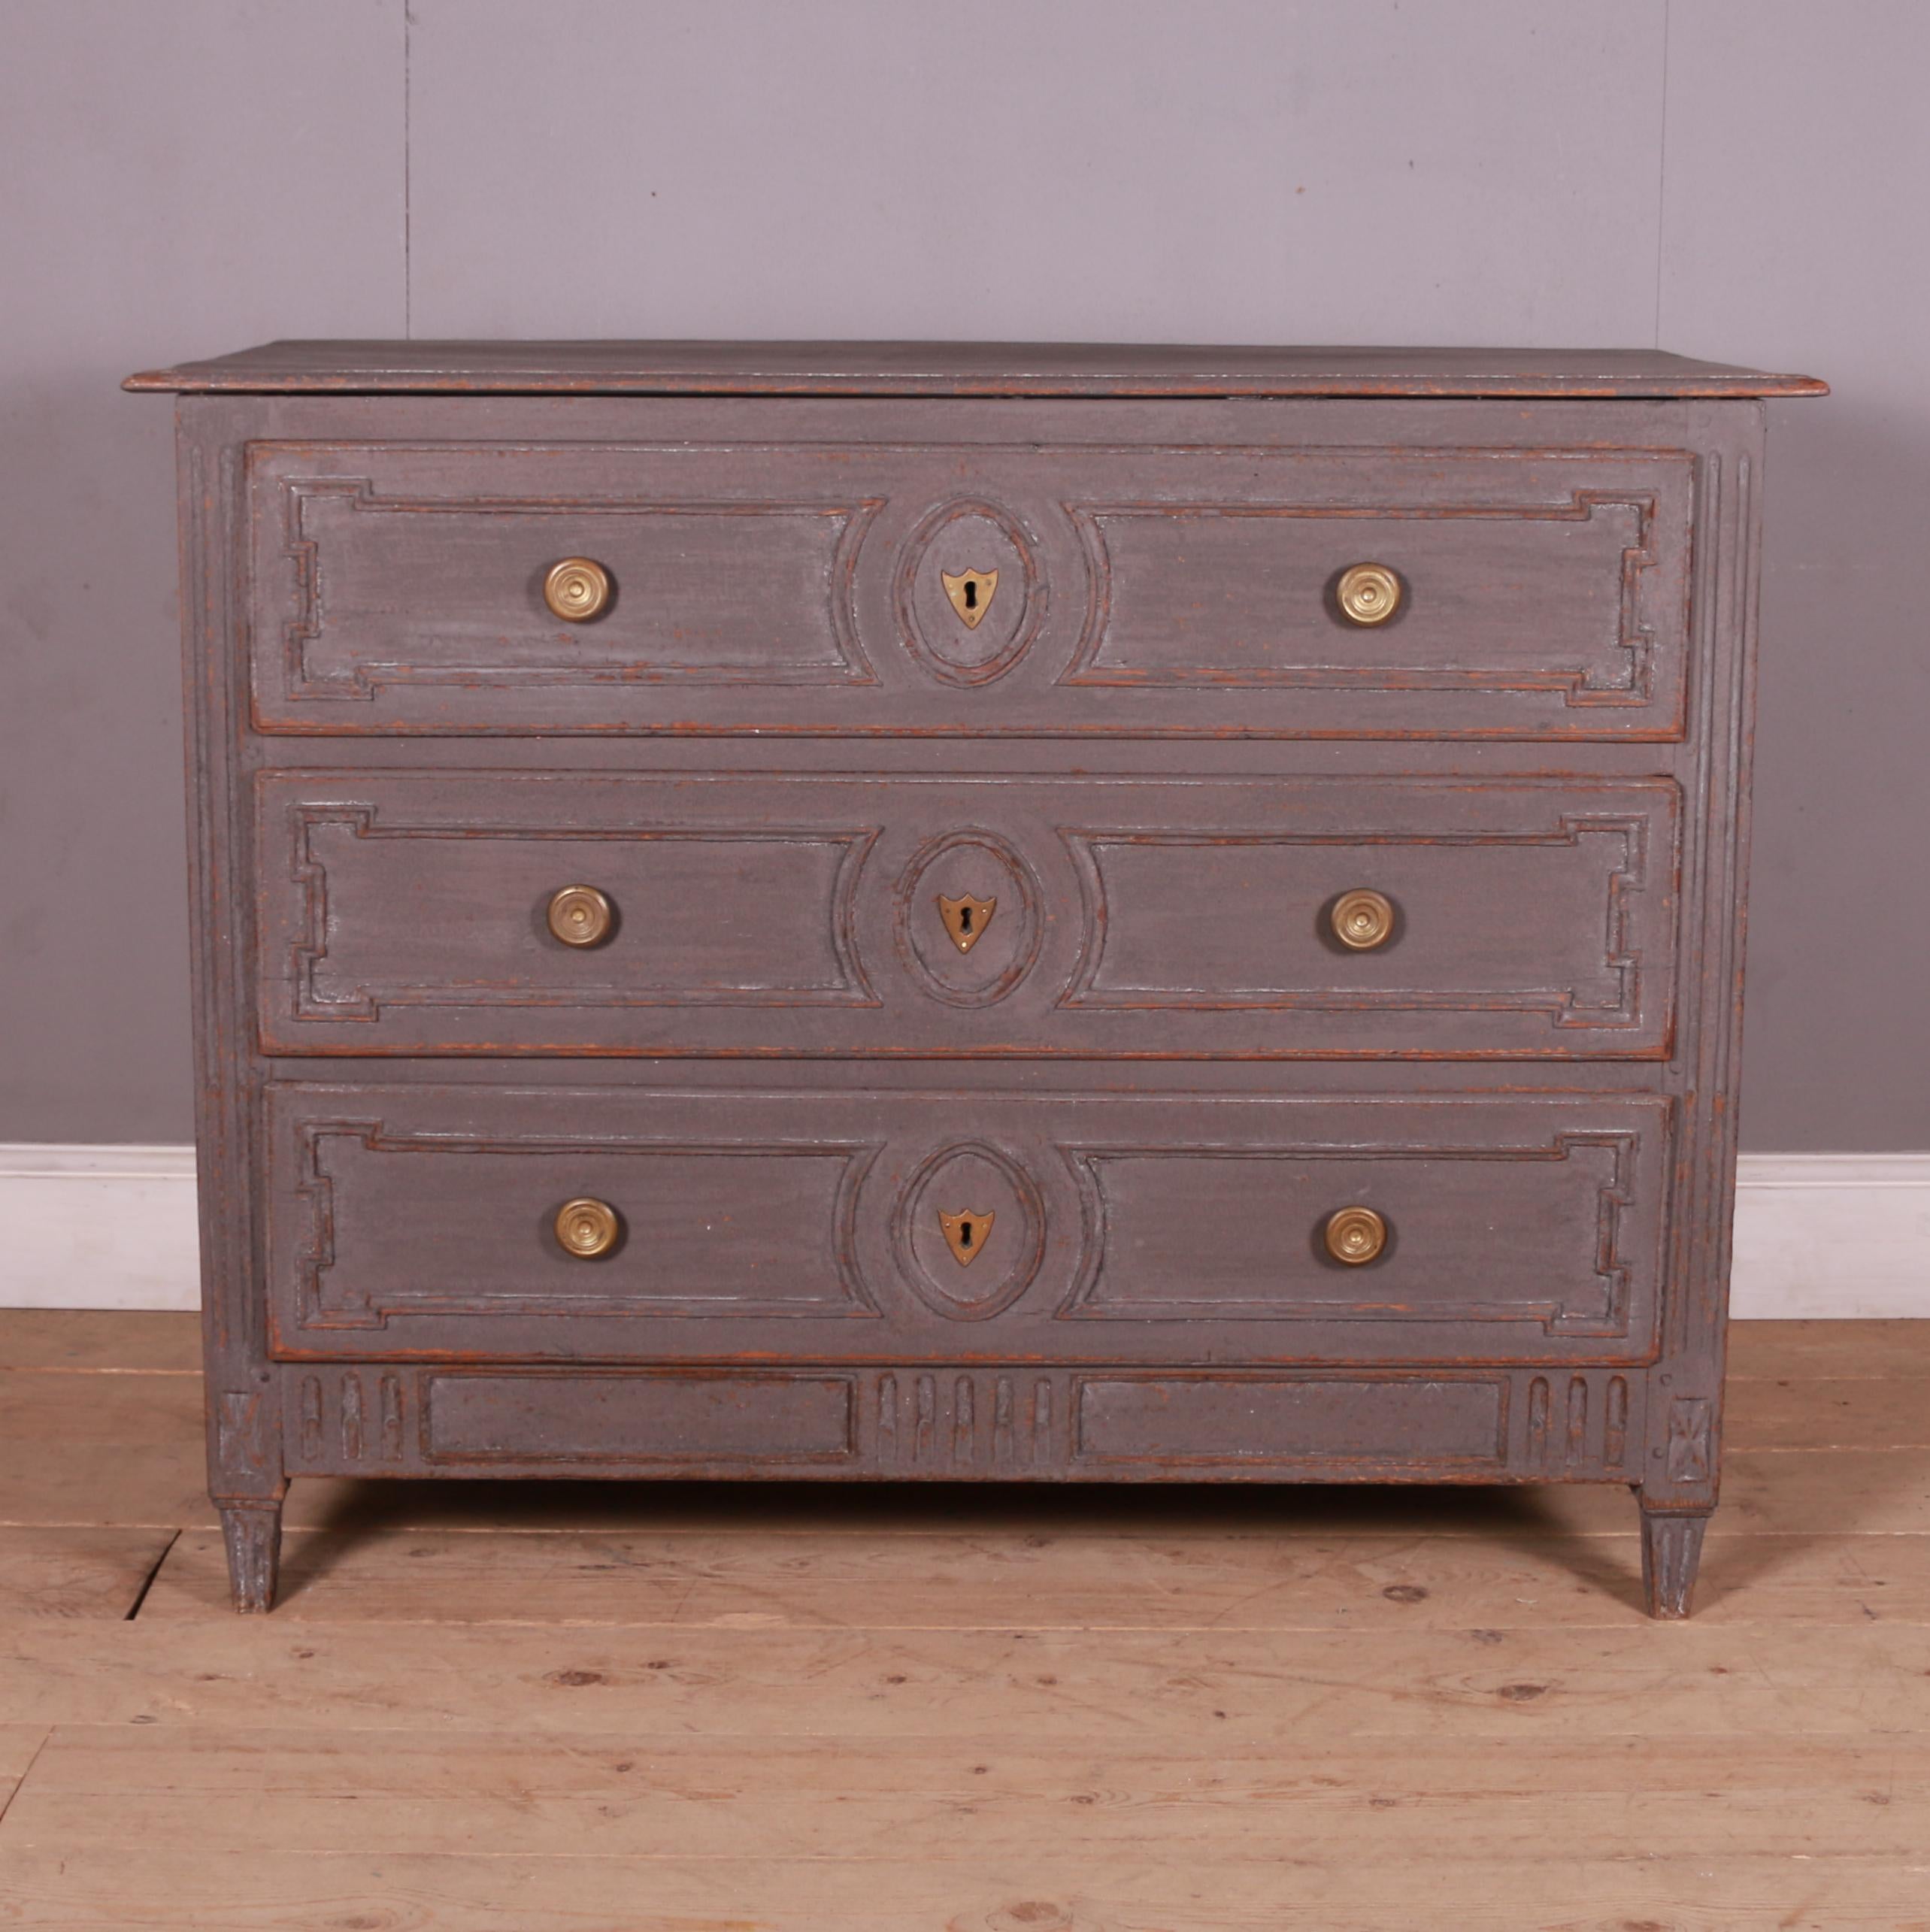 19th Century French Painted Commode In Good Condition For Sale In Leamington Spa, Warwickshire